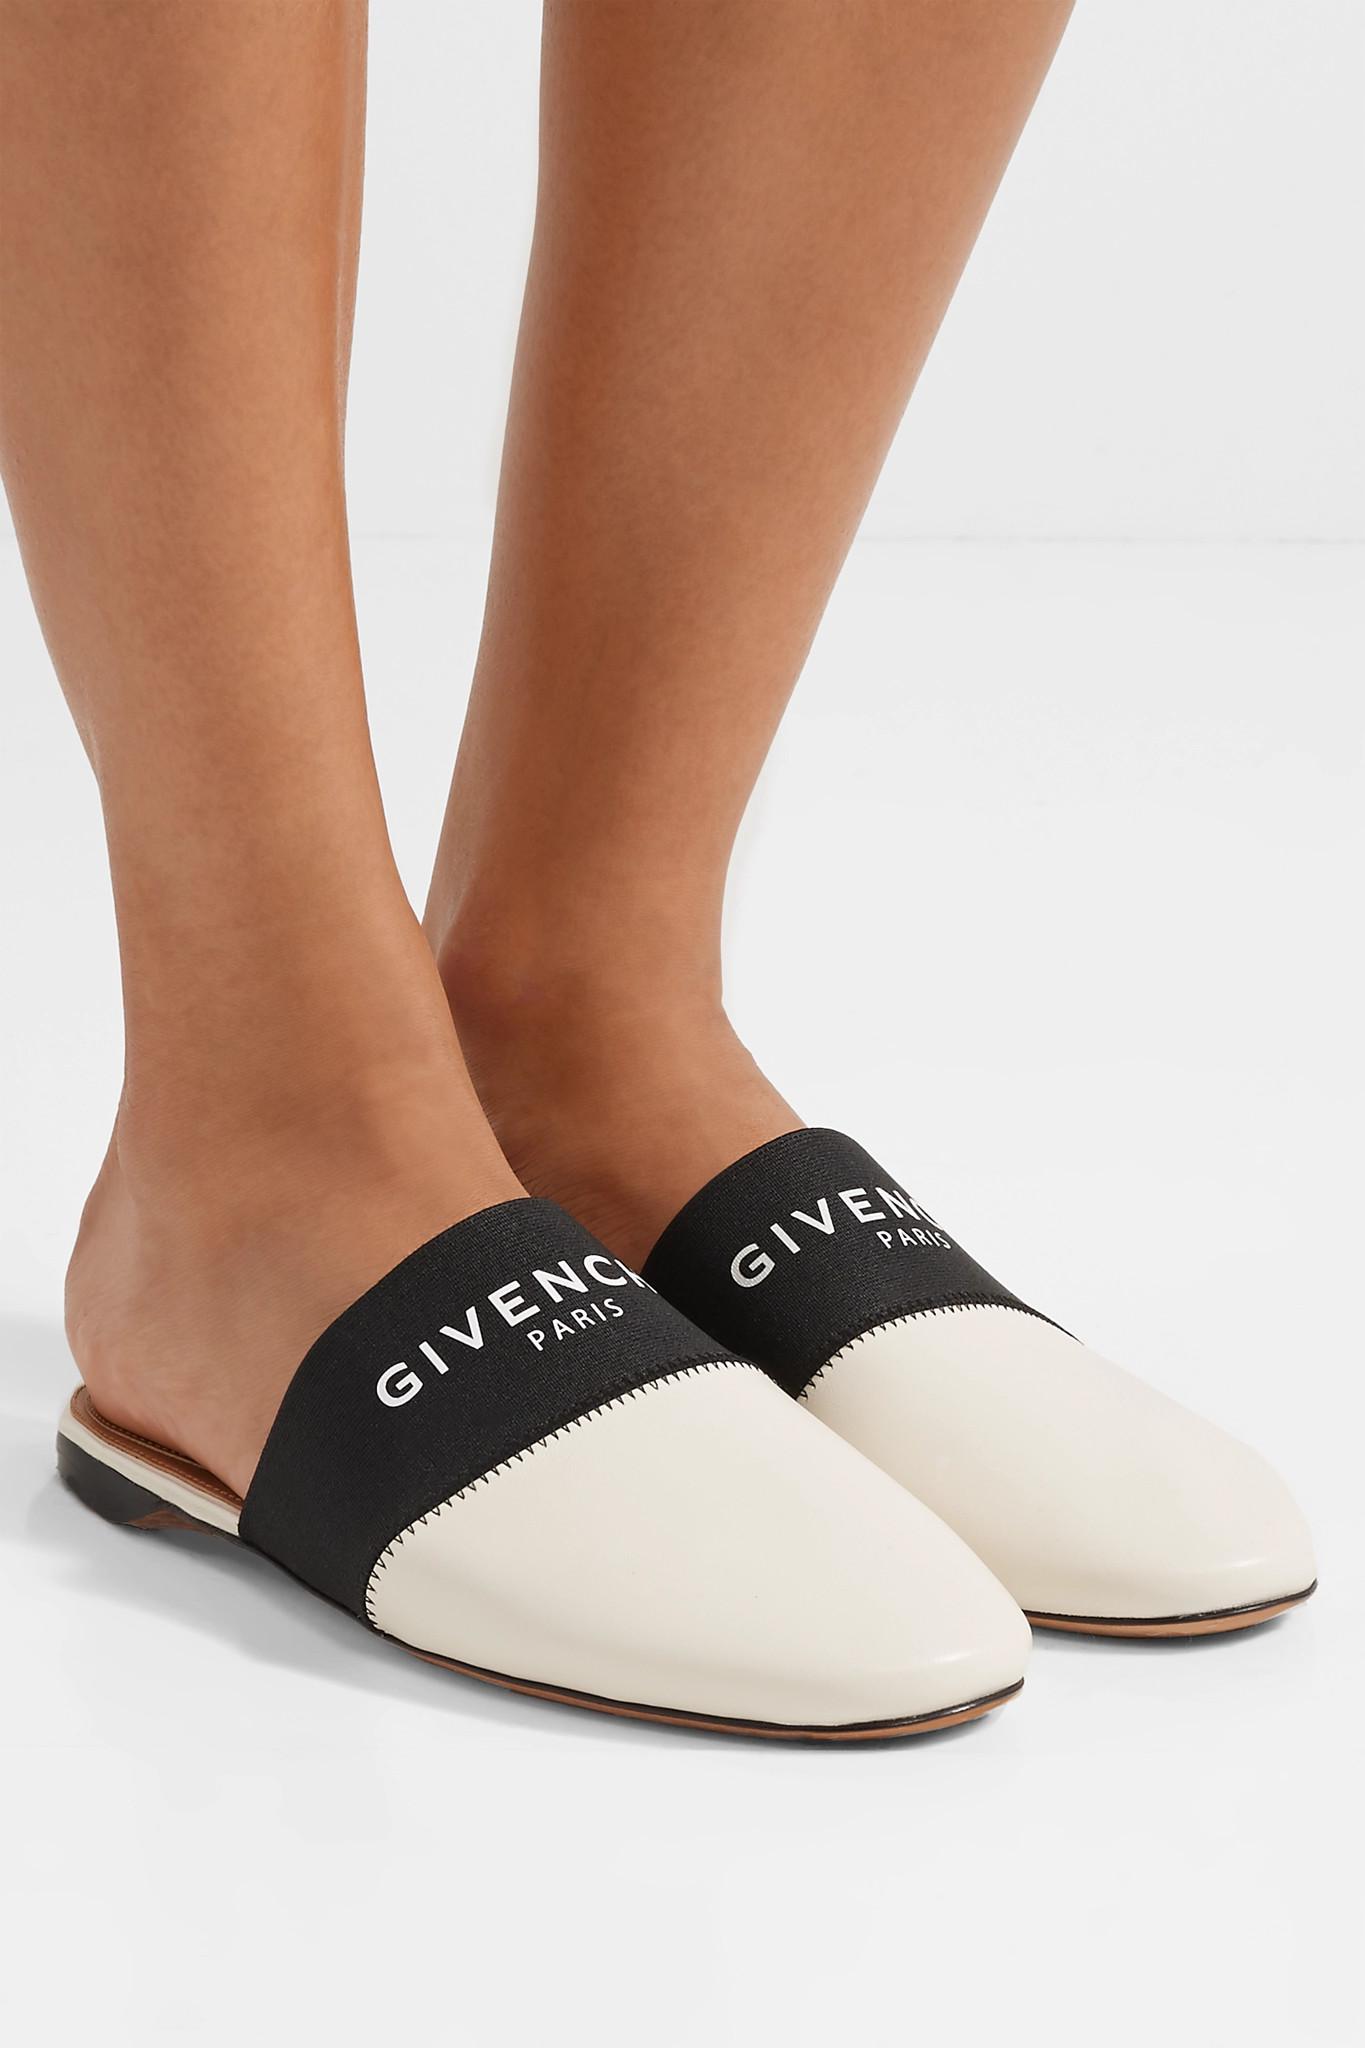 givenchy white slippers